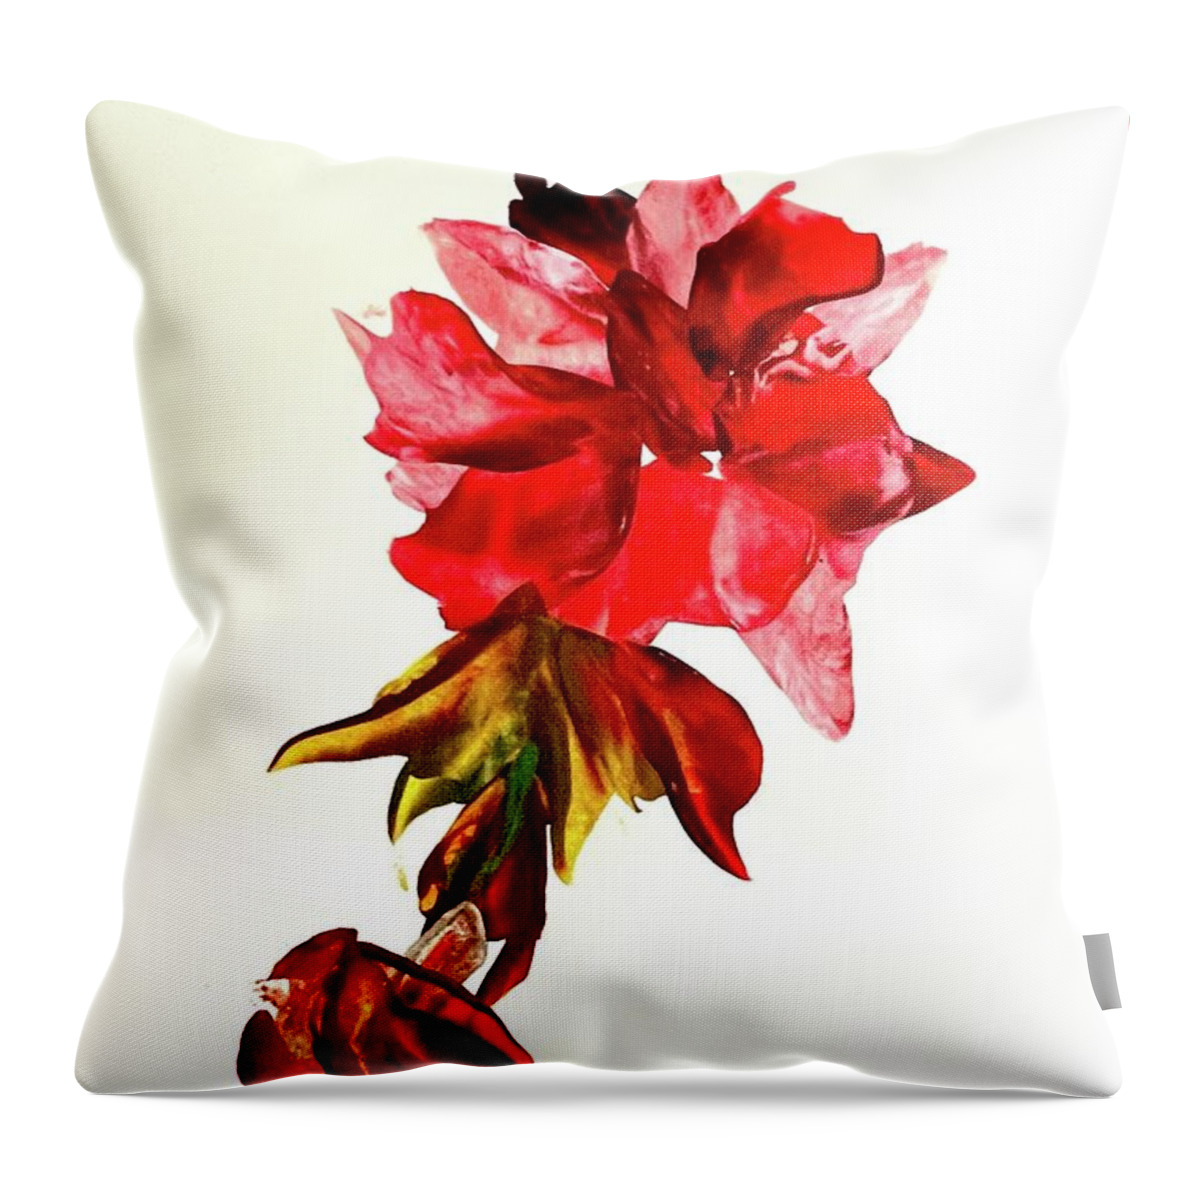 Encaustic Throw Pillow featuring the painting Color Me Red by Tommy McDonell